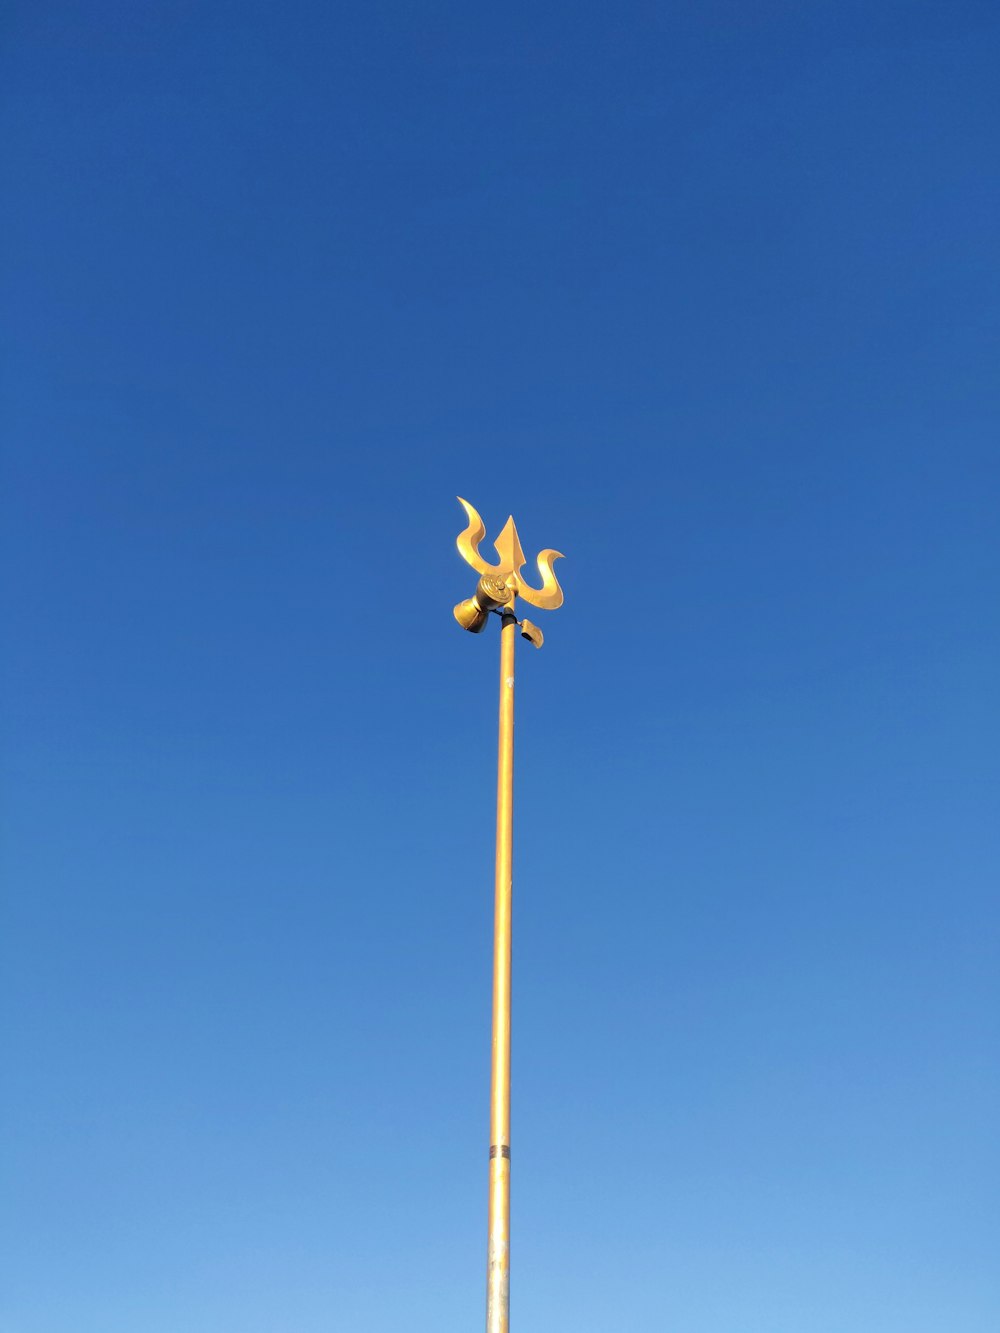 yellow and black wind mill under blue sky during daytime